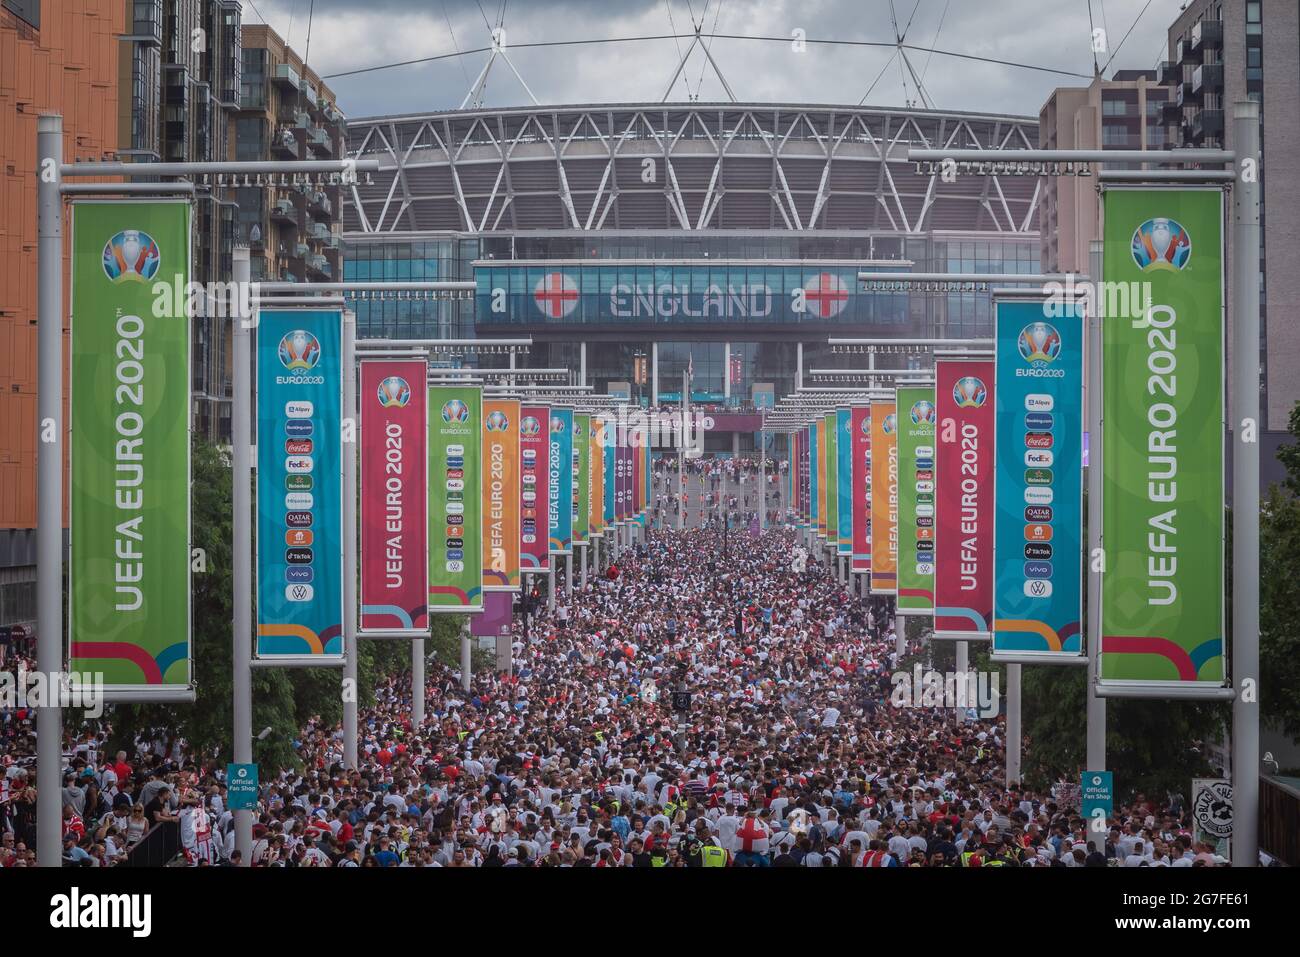 Euro 2020: Fans arrive at Wembley in a festive mood ahead of England vs Italy match finals. London, UK. Stock Photo